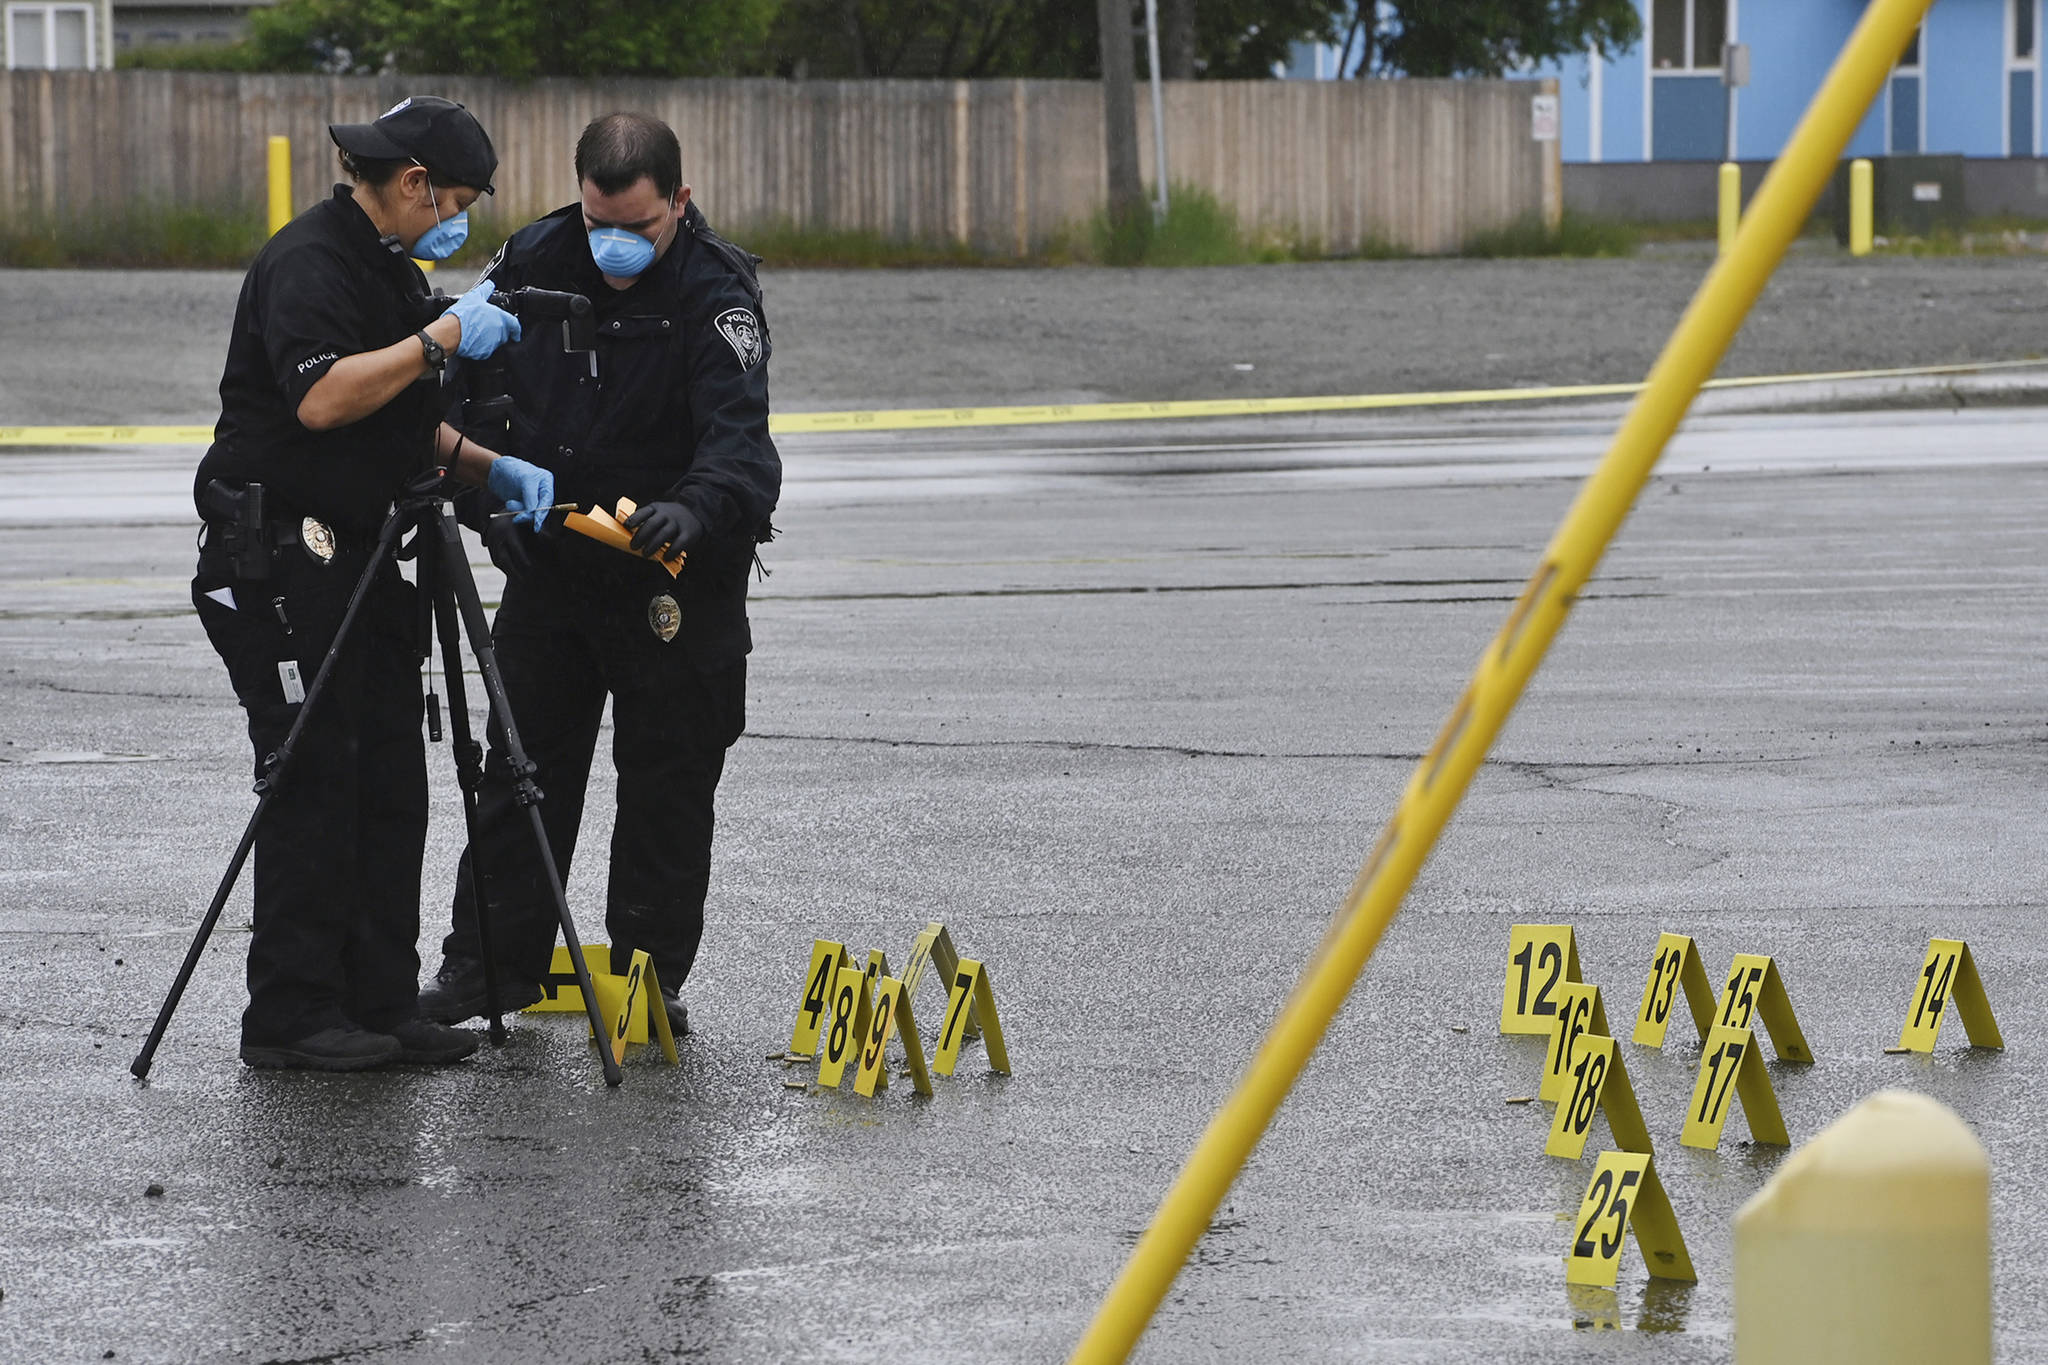 Police investigate the scene of an early morning fatal shooting along Gambell Street between Fourth Avenue and Fifth Avenue near downtown Anchorage, Alaska, Saturday, June 19, 2021. (Bill Roth/Anchorage Daily News via AP)